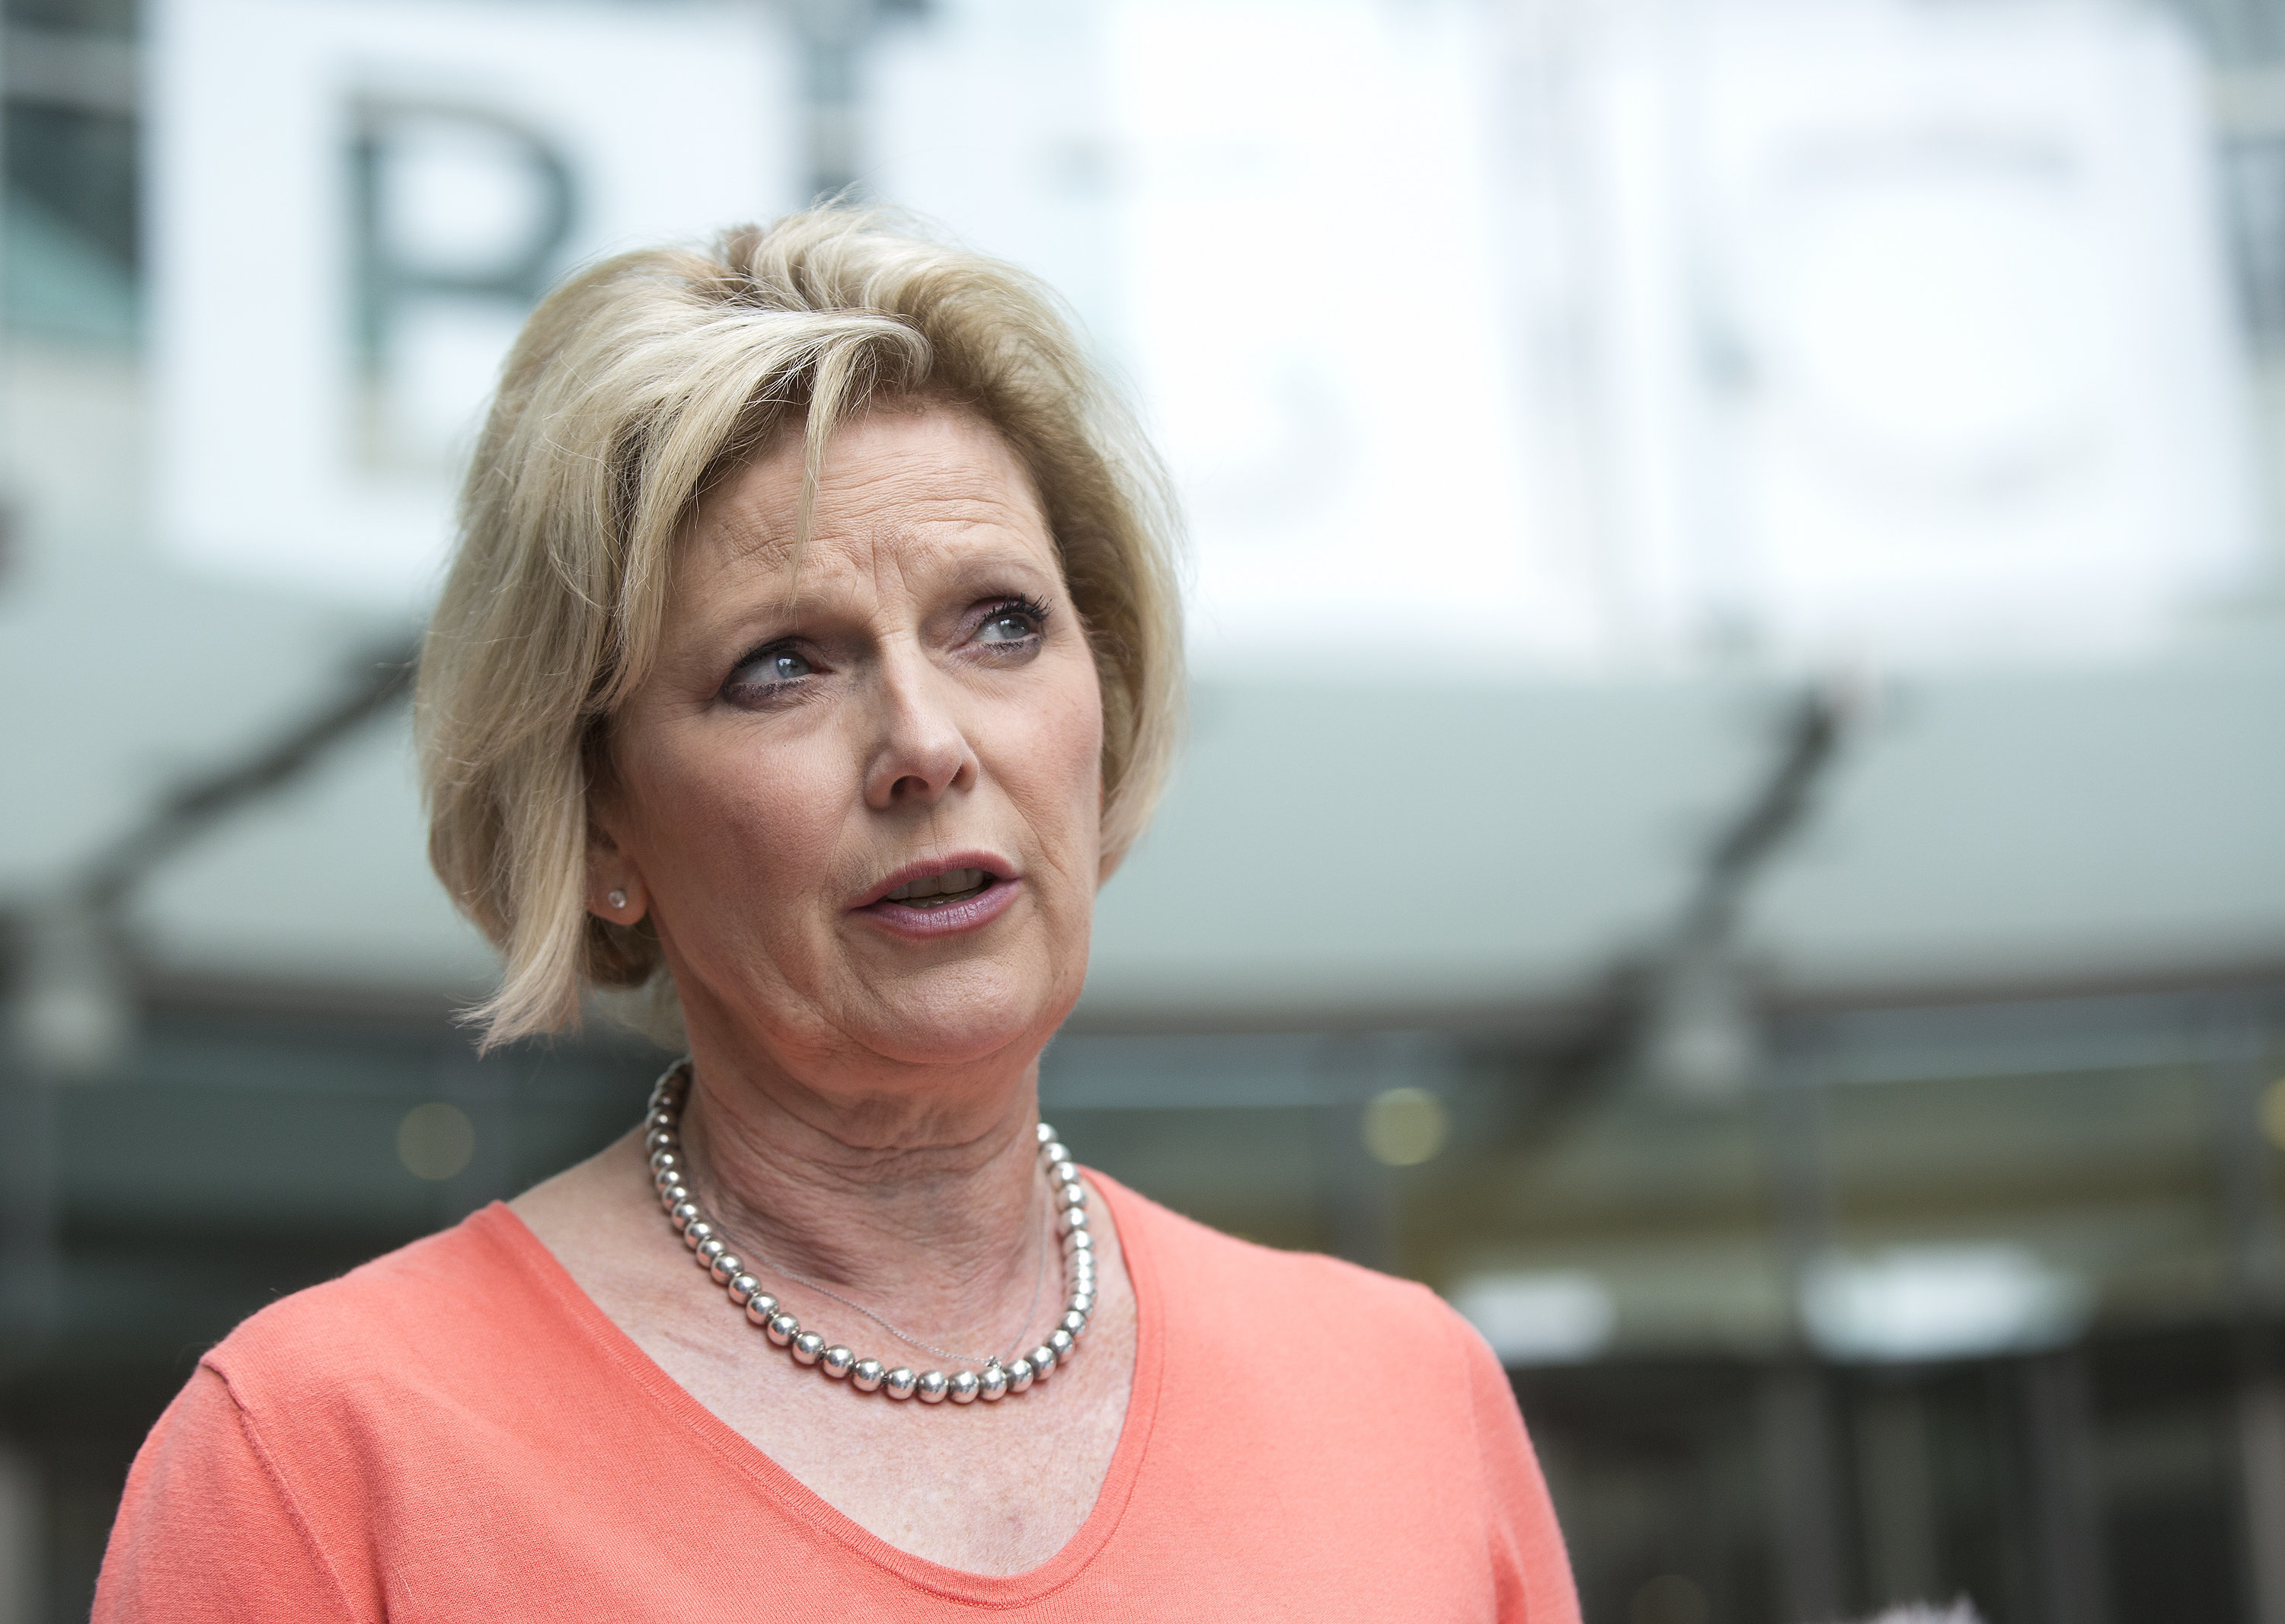 <strong>Anna Soubry received death threats after she spoke out about Brexit</strong>